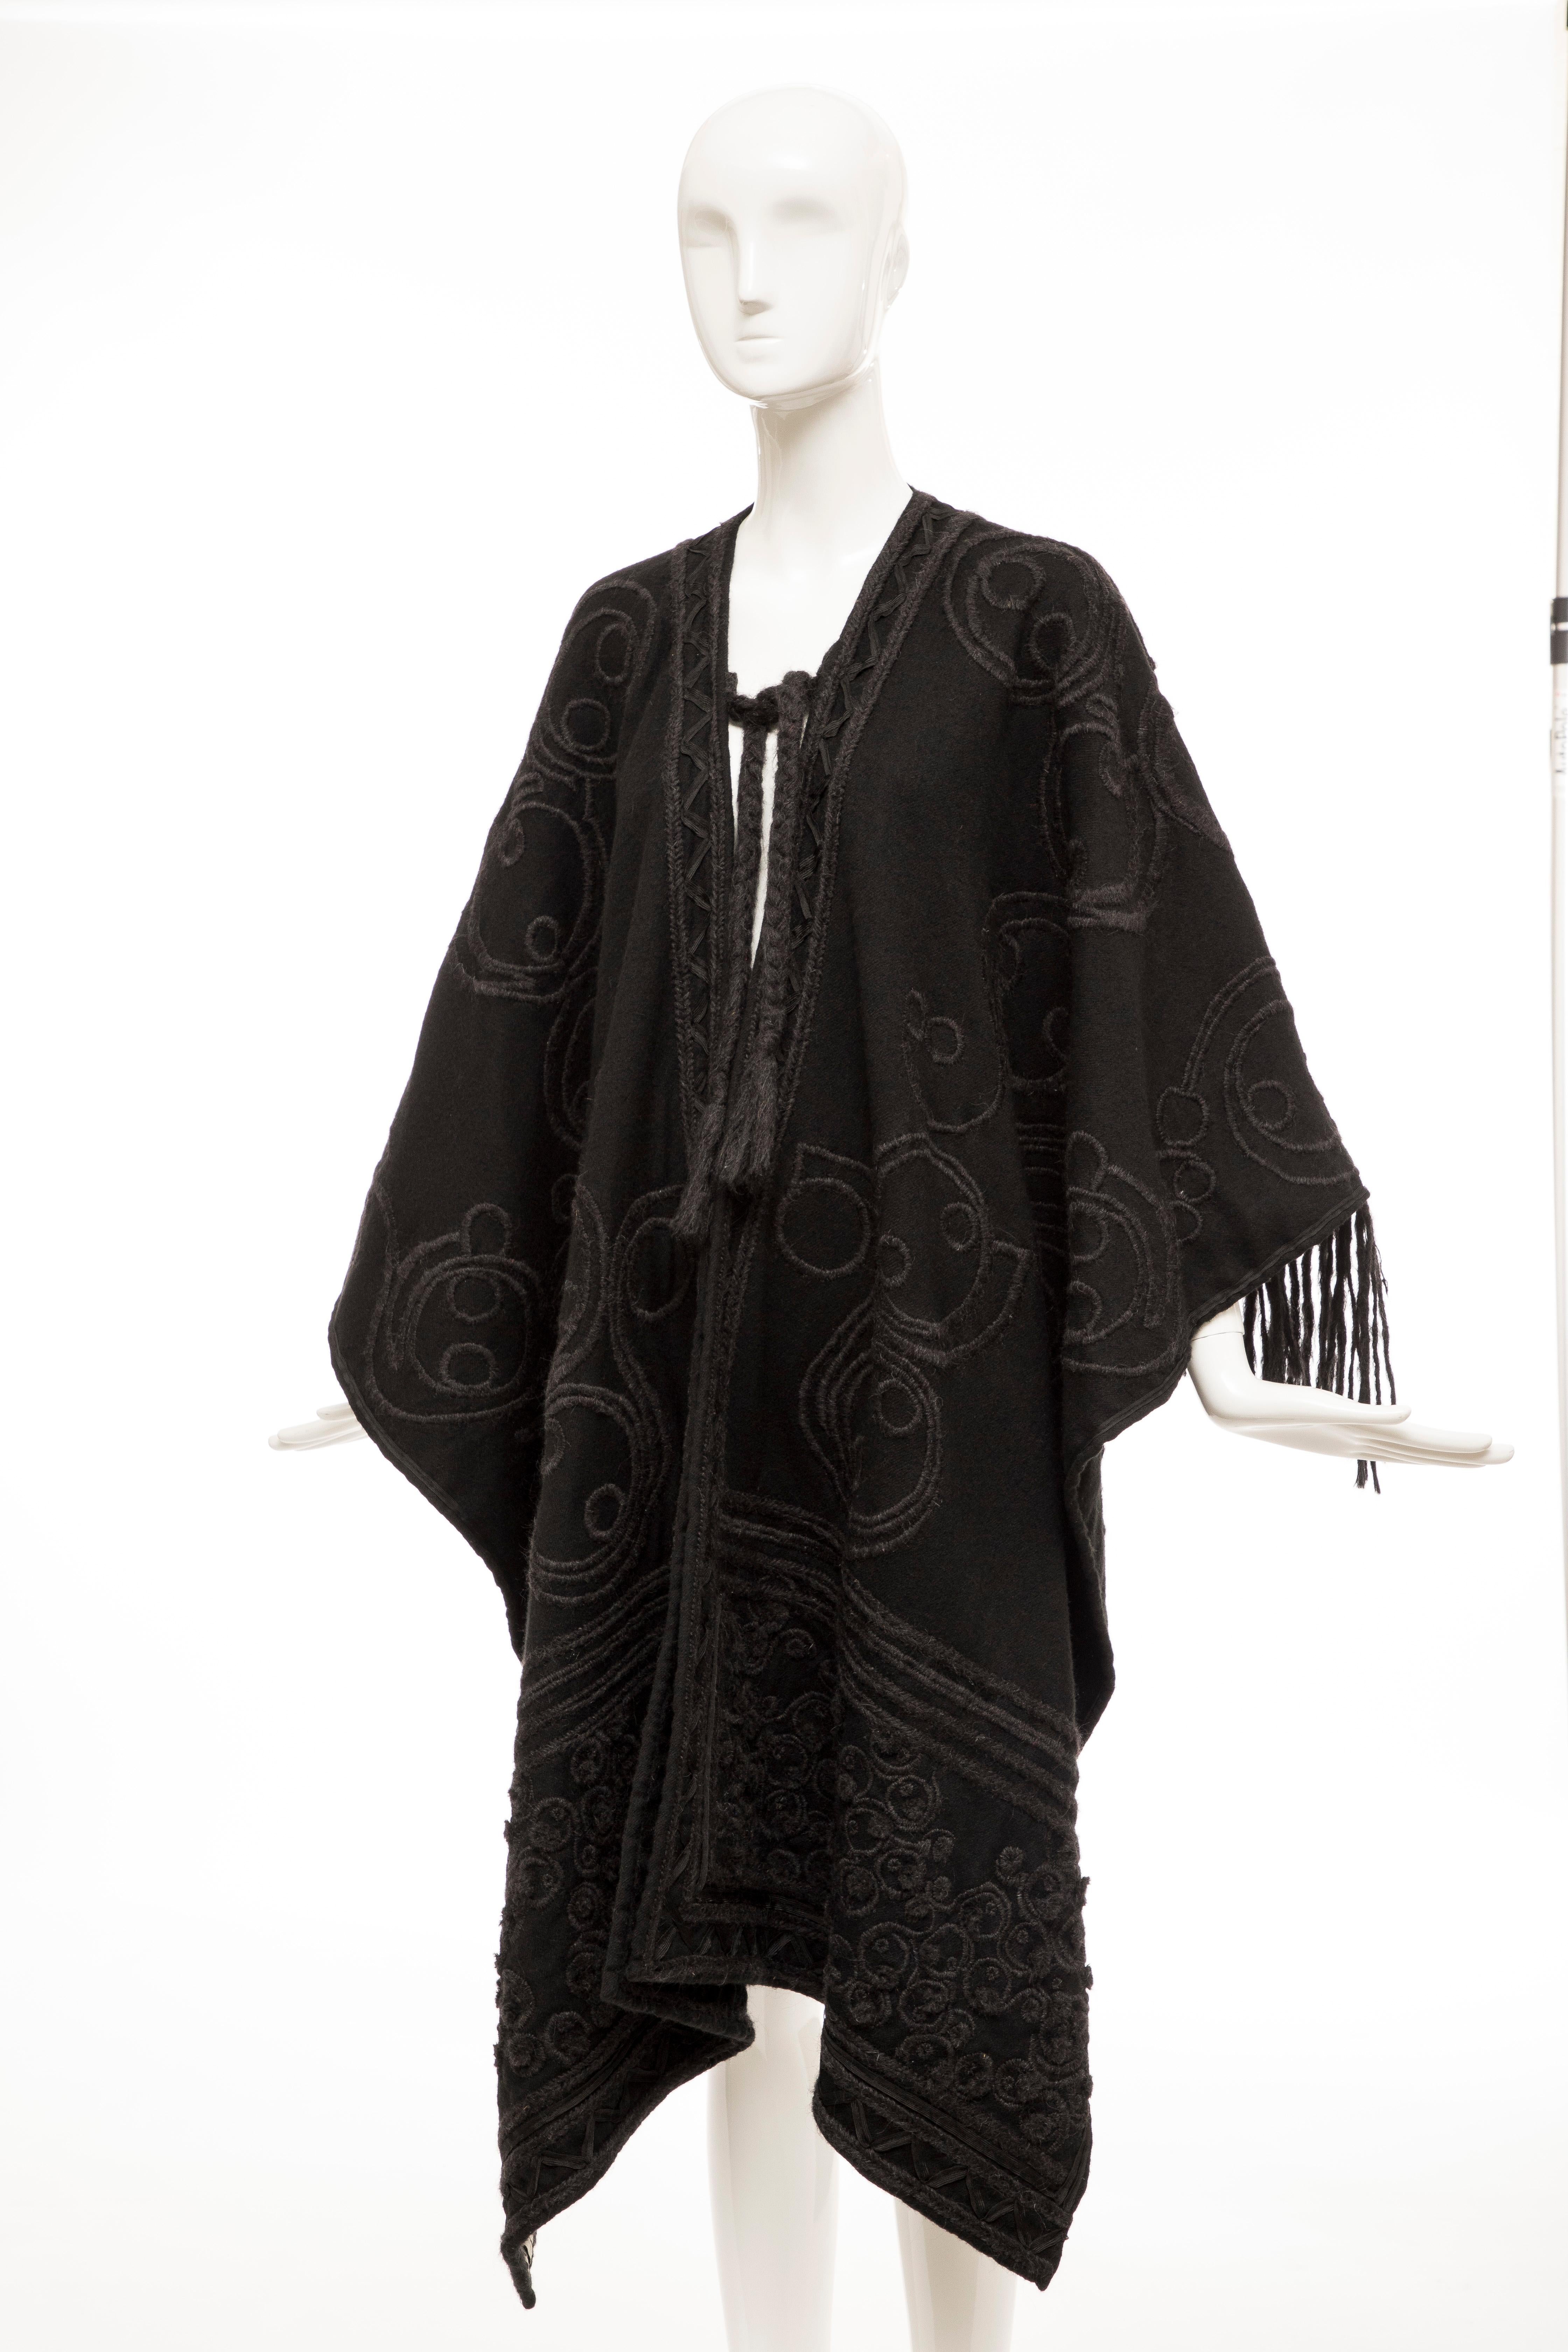 Dries Van Noten Runway Black Wool Embroidered Fringe Cape, Fall 2002 For Sale 7